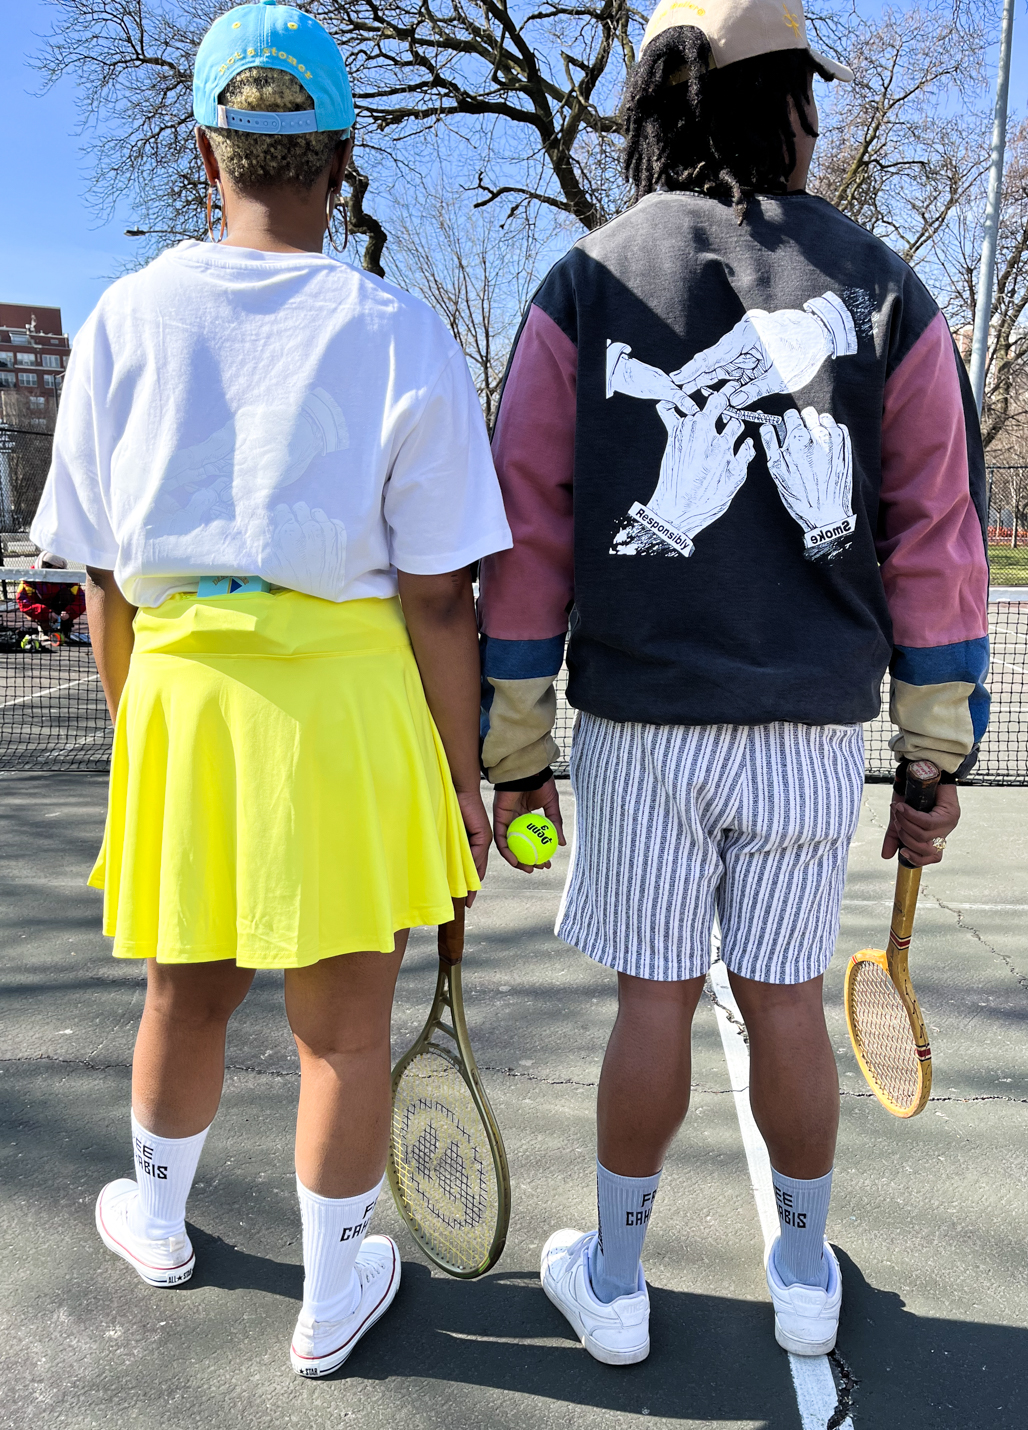 Team Daily Roller Roller Circle donning Smoke Responsibly Souvenir Collection Tops and Free Cannabis sock in tennis regalia